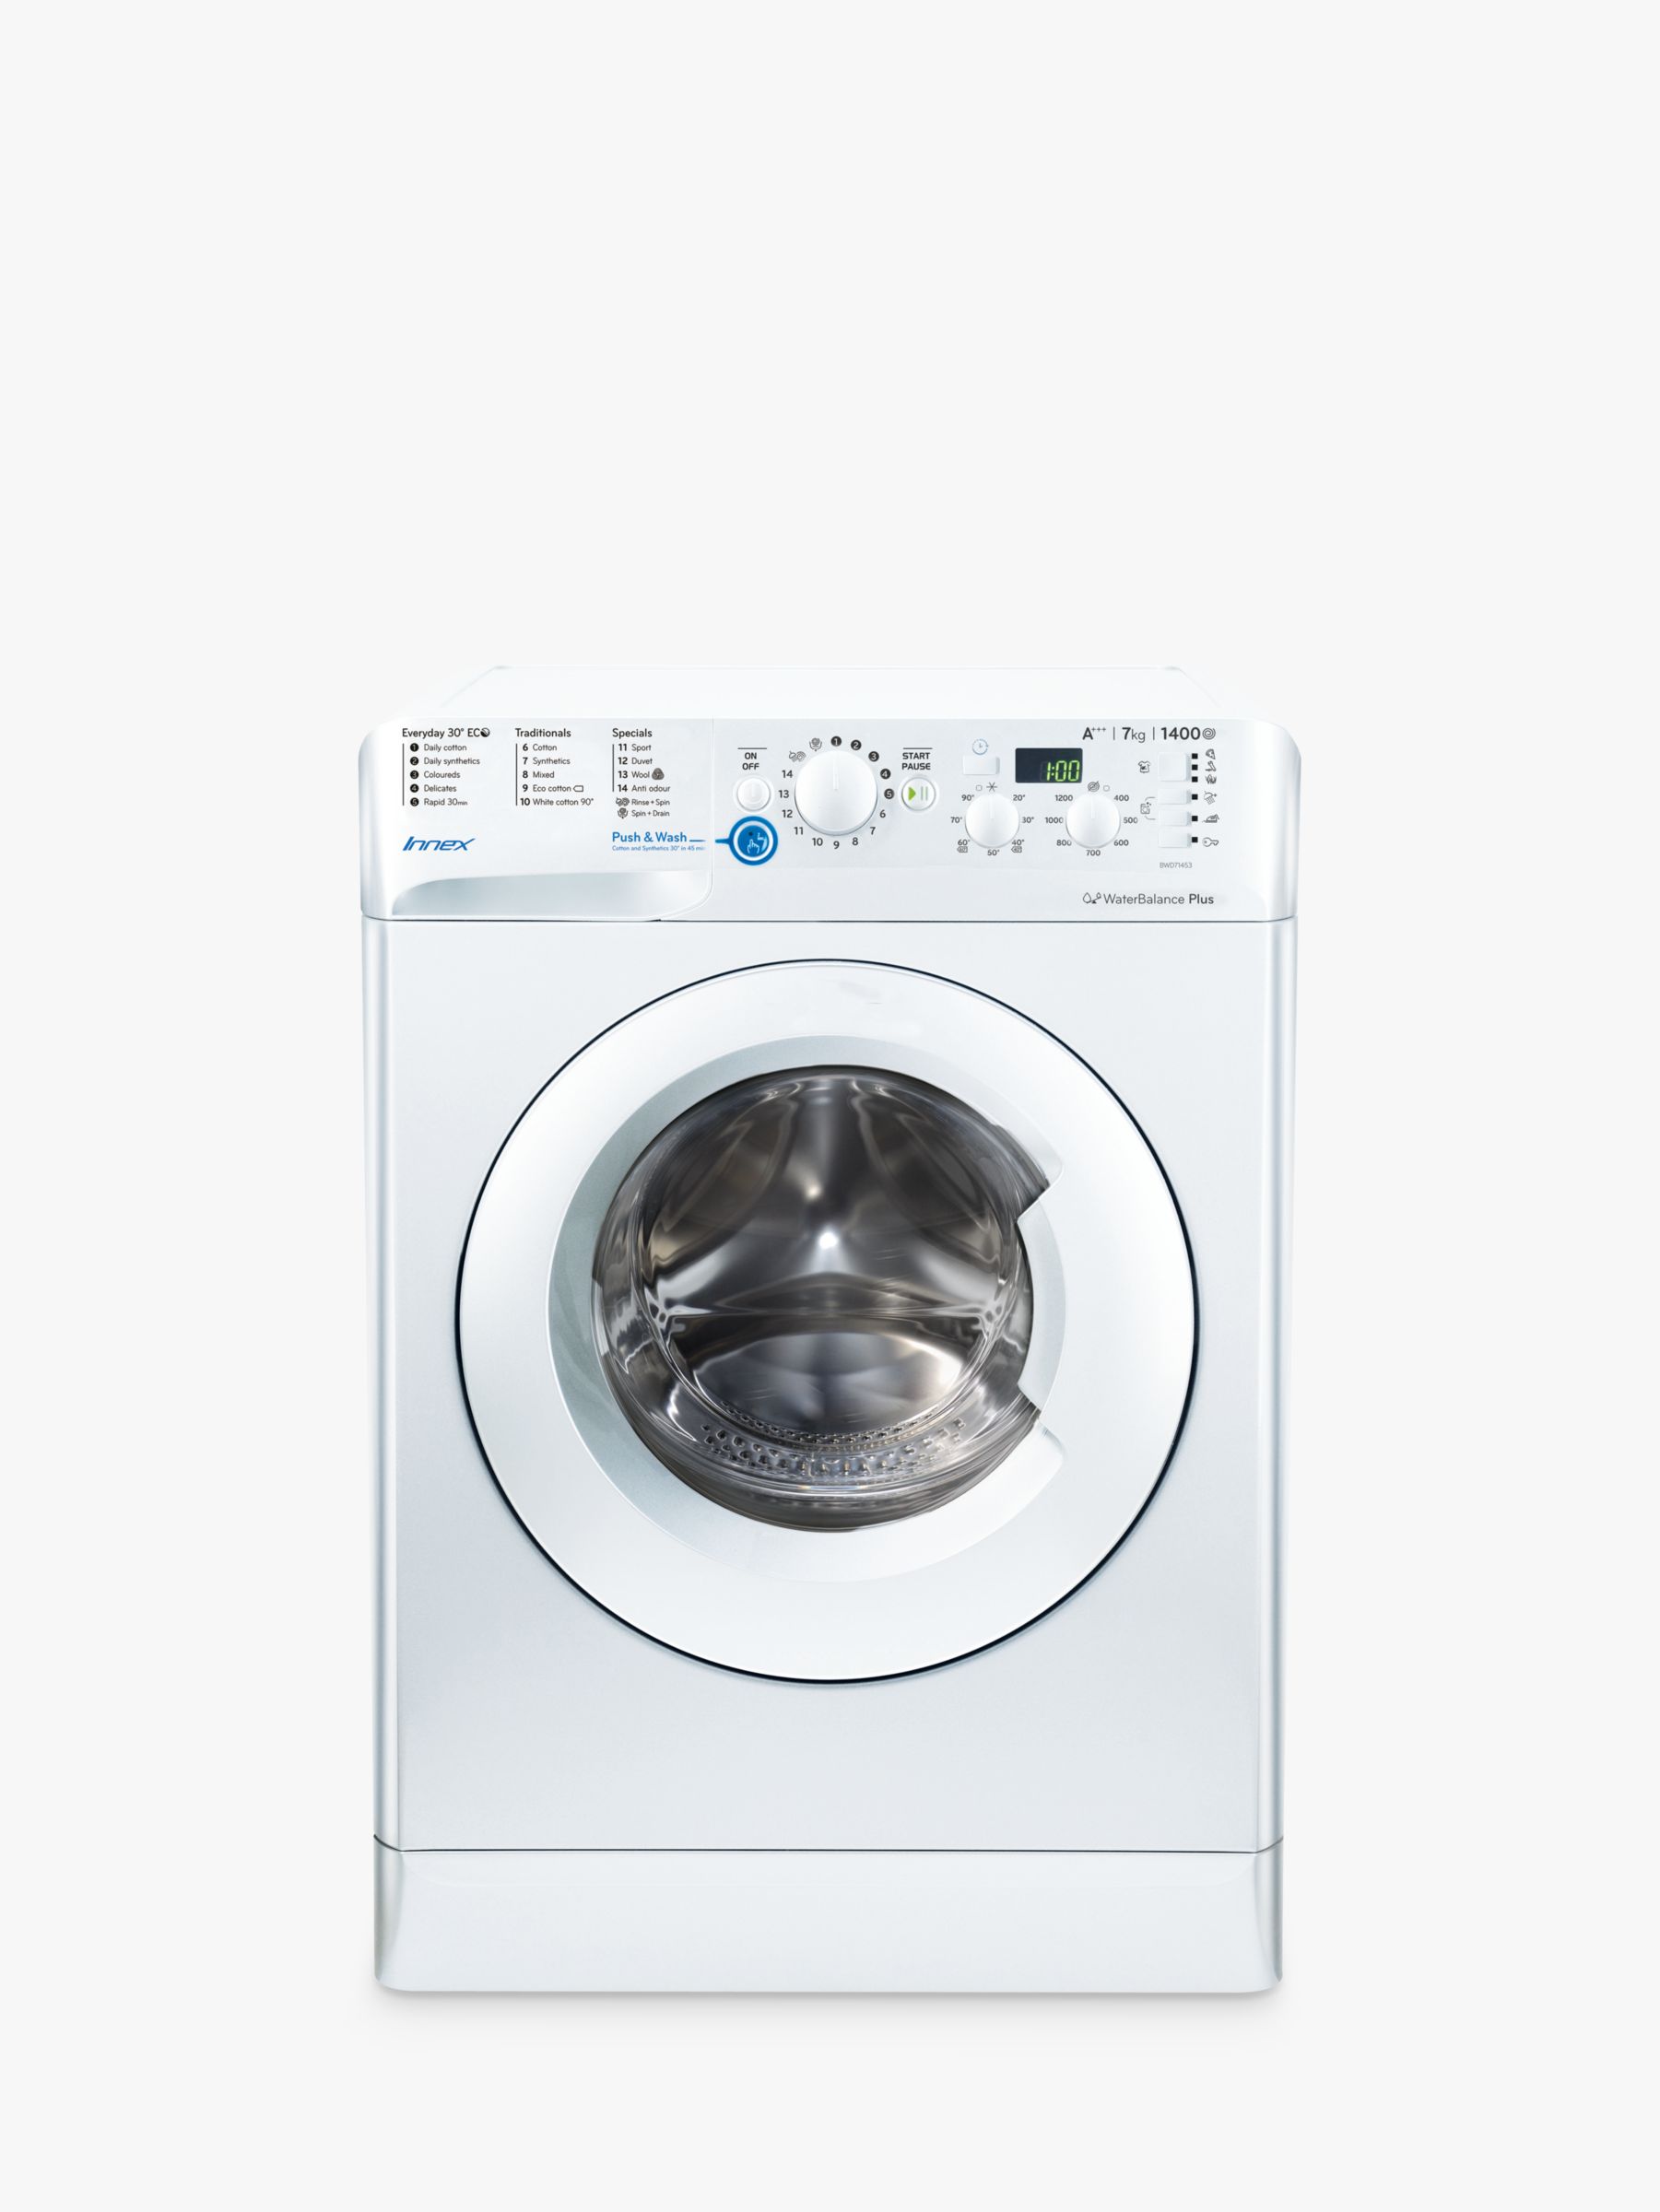 Indesit Innex BWD71453WUK Freestanding Washing Machine 7kg Load, A+++ Energy Rating, 1400rpm, White